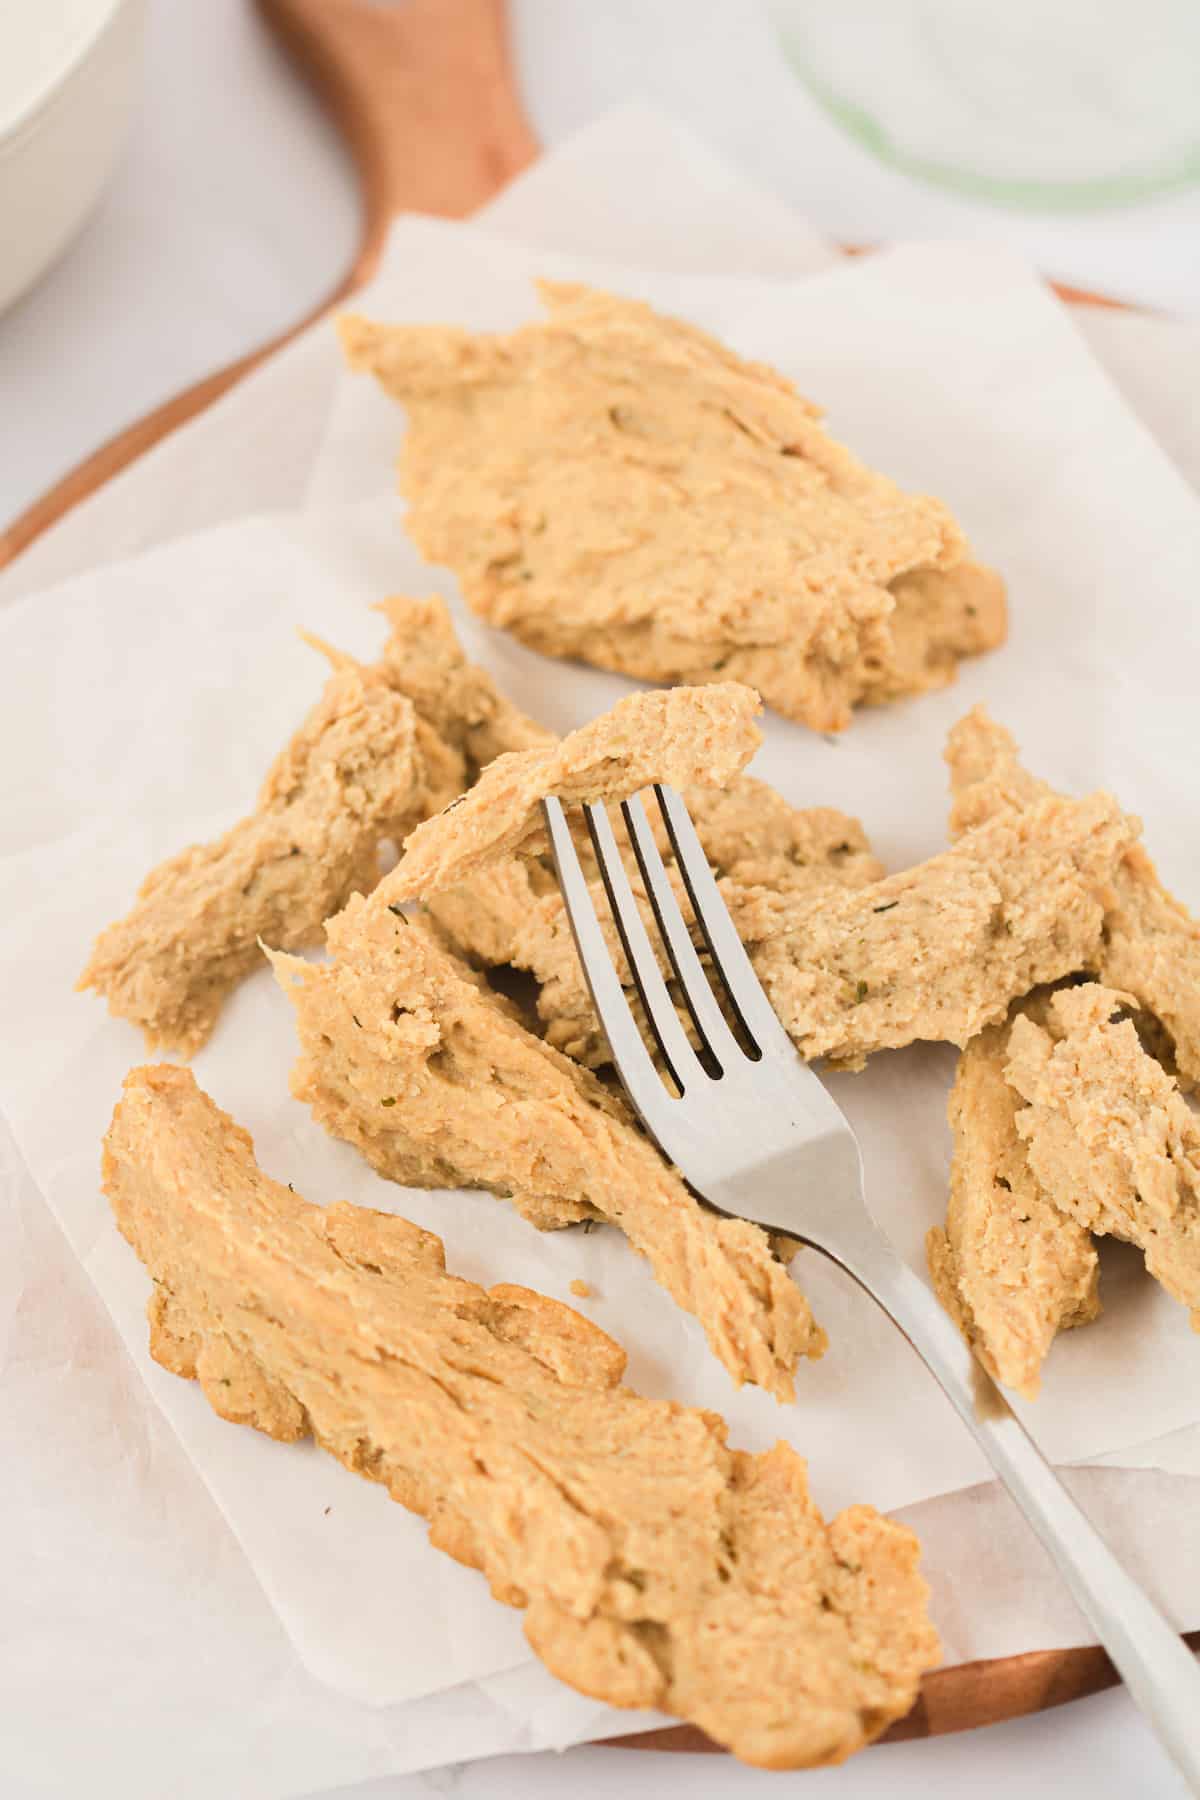 Torn pieces of vegan chicken on parchment paper with fork